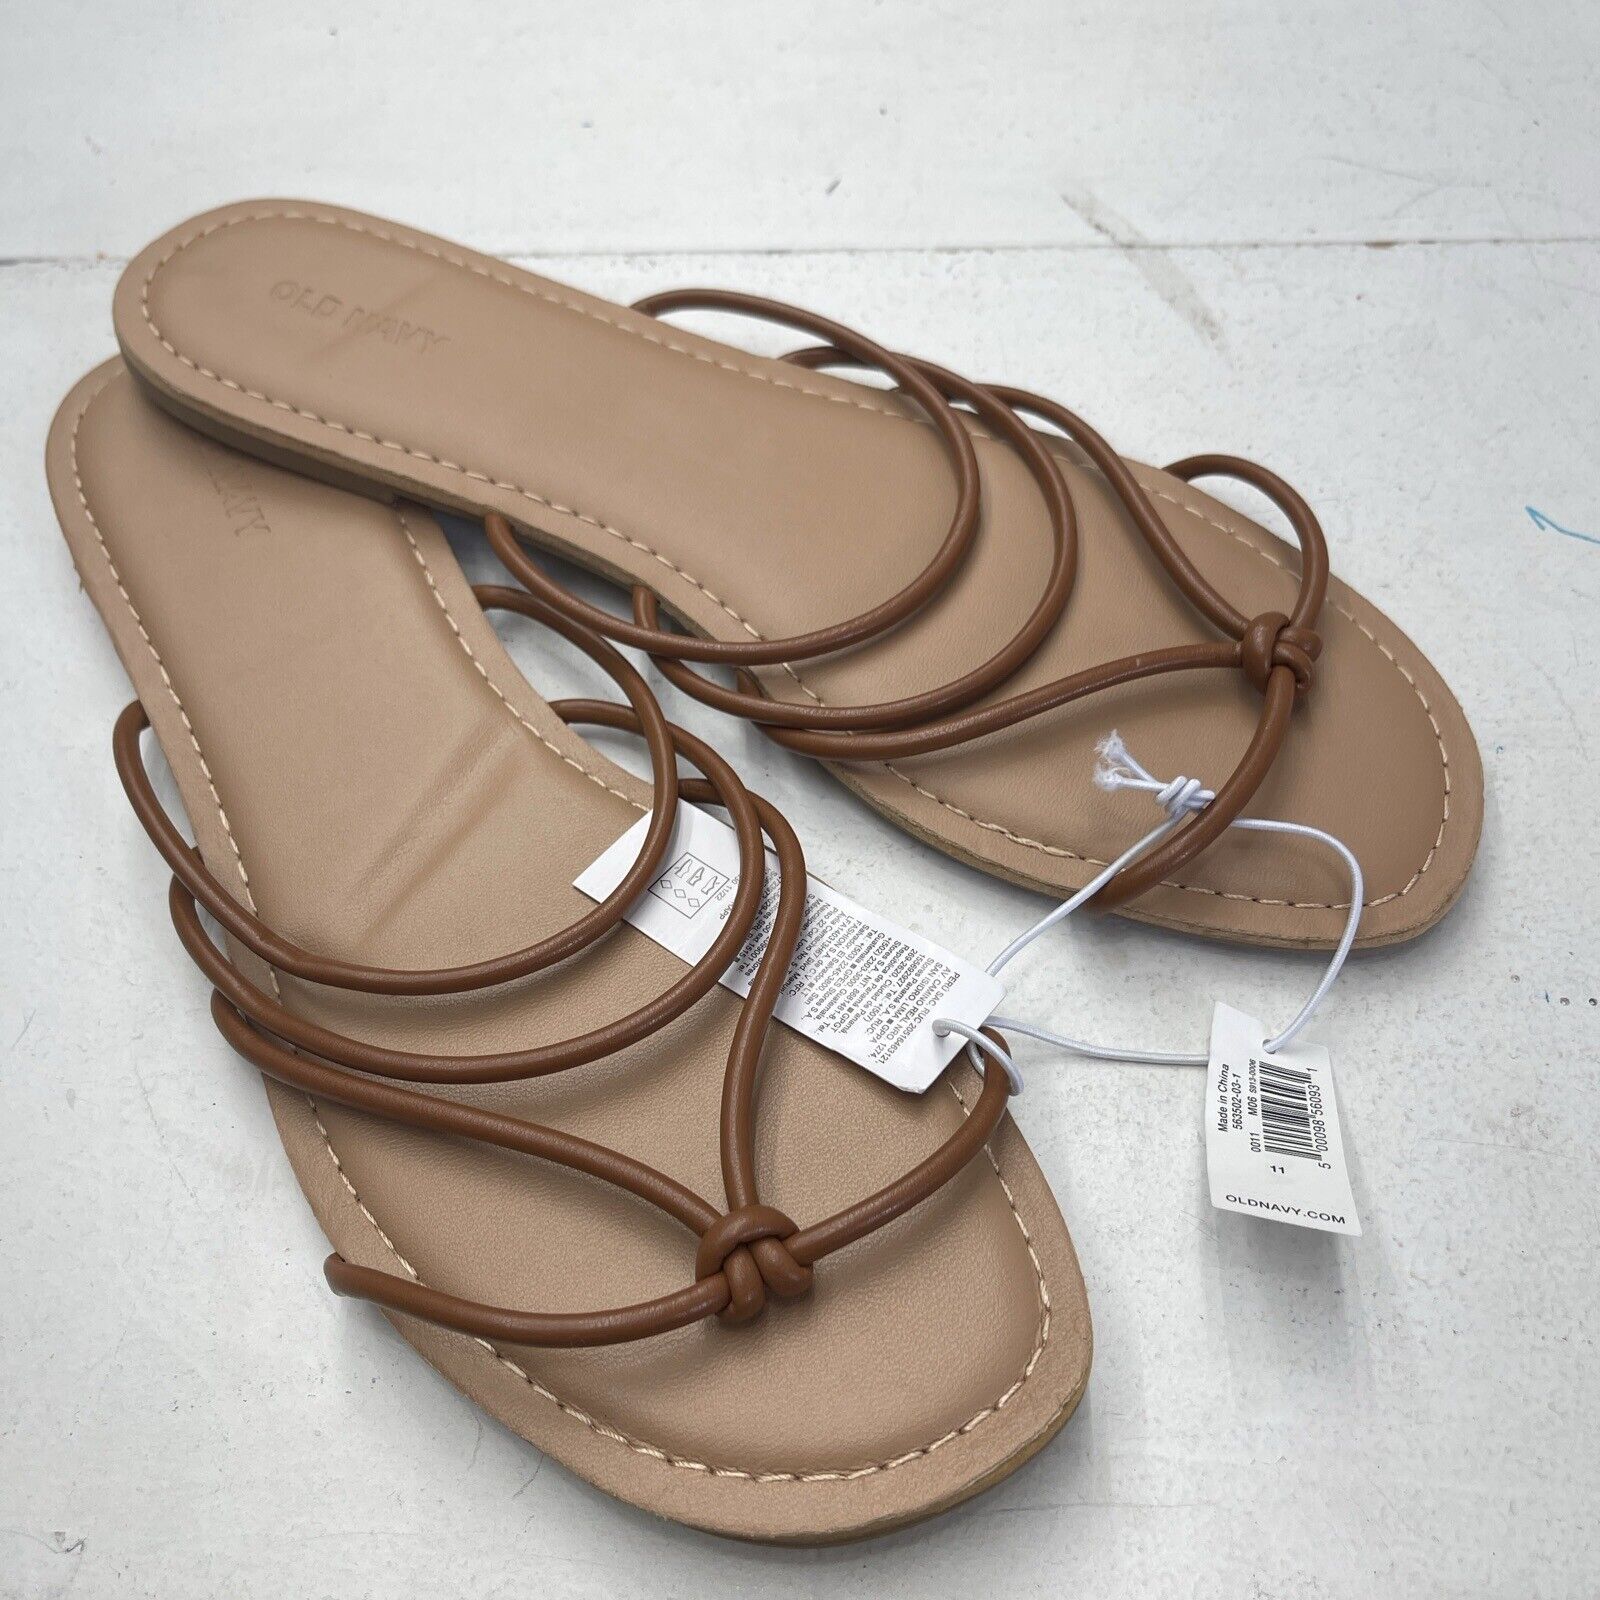 Womens Flat Sandals, Flat Leather & Strappy Sandals